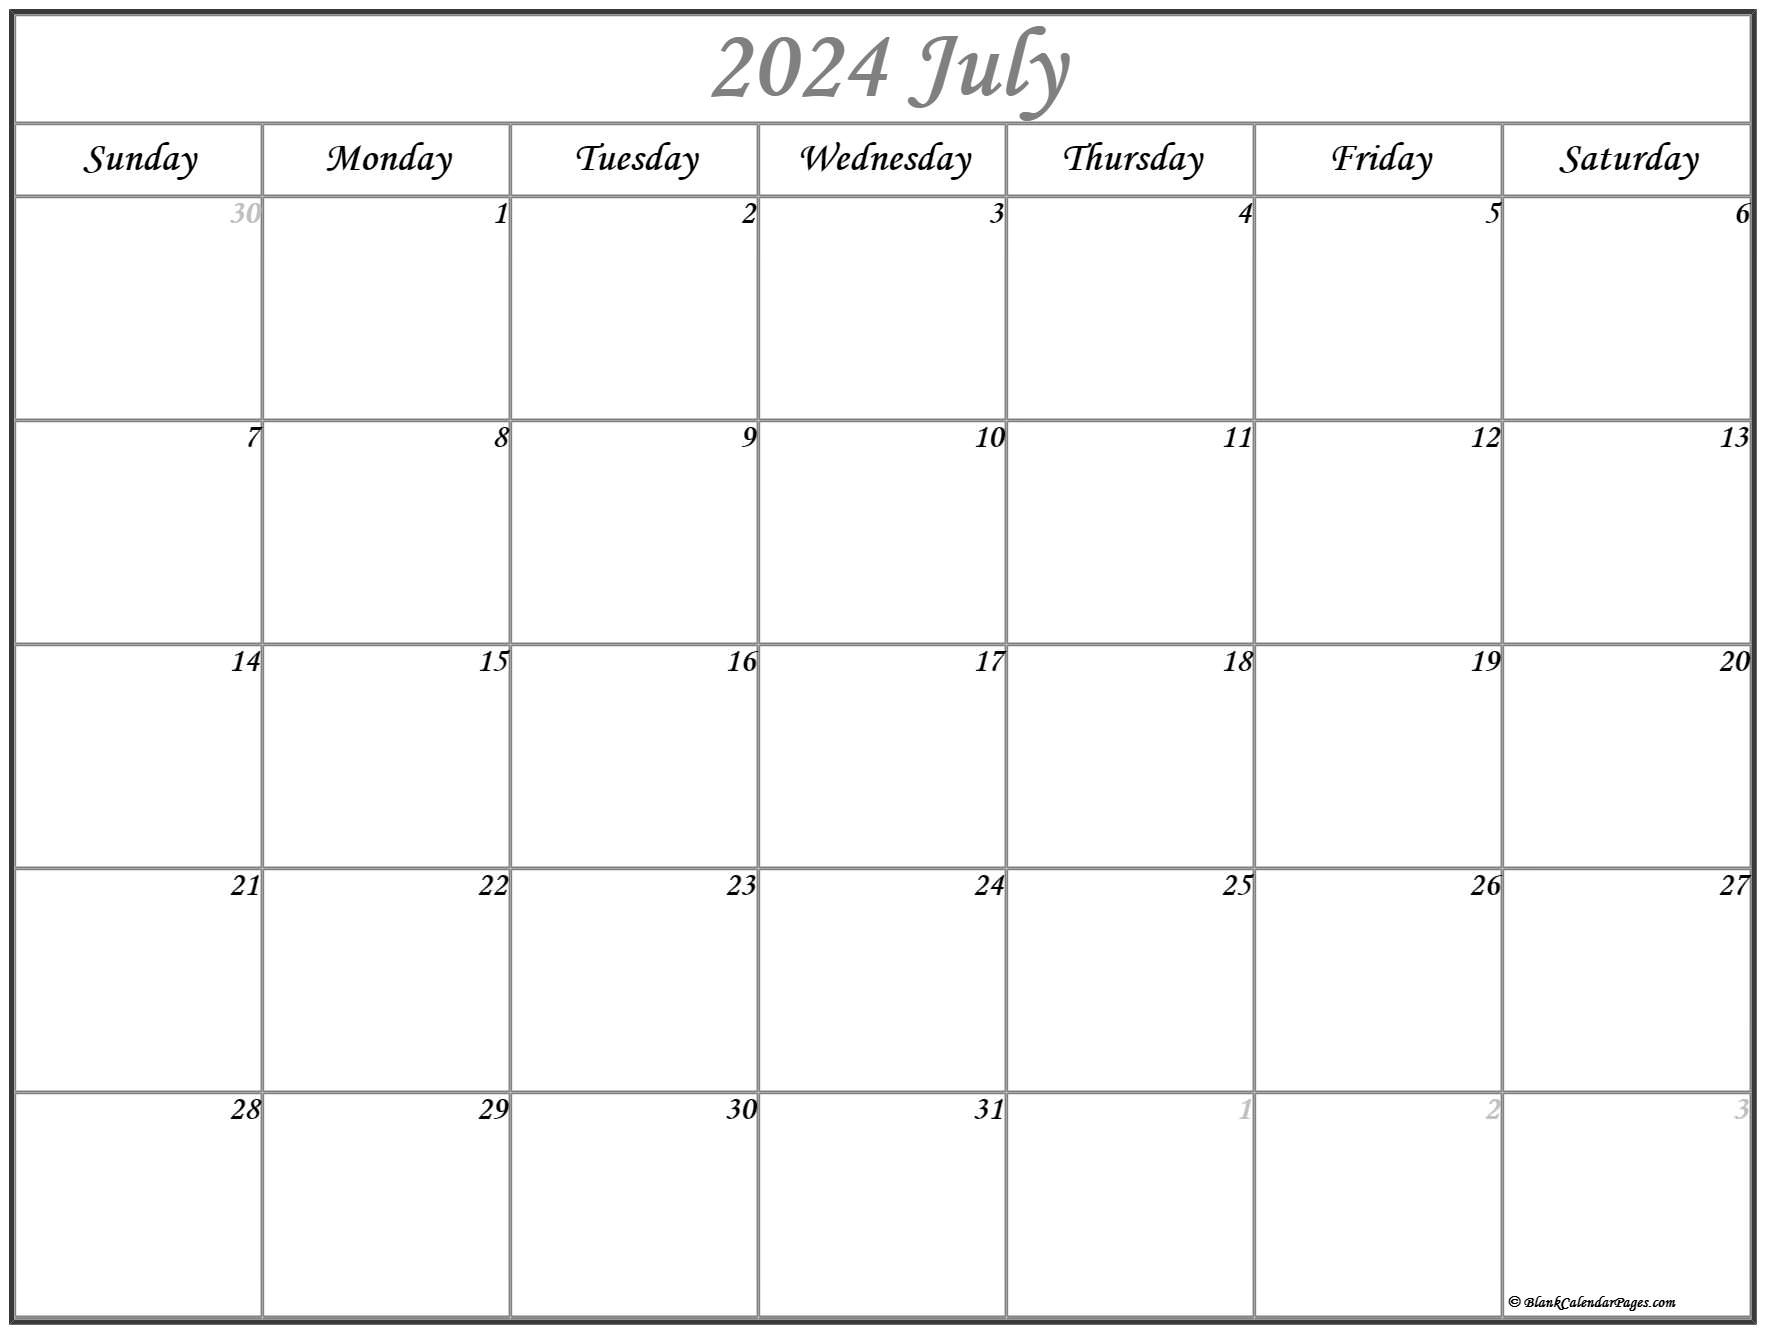 July 2024 Calendar | Free Printable Calendar within Pull Up Calendar For July 2024